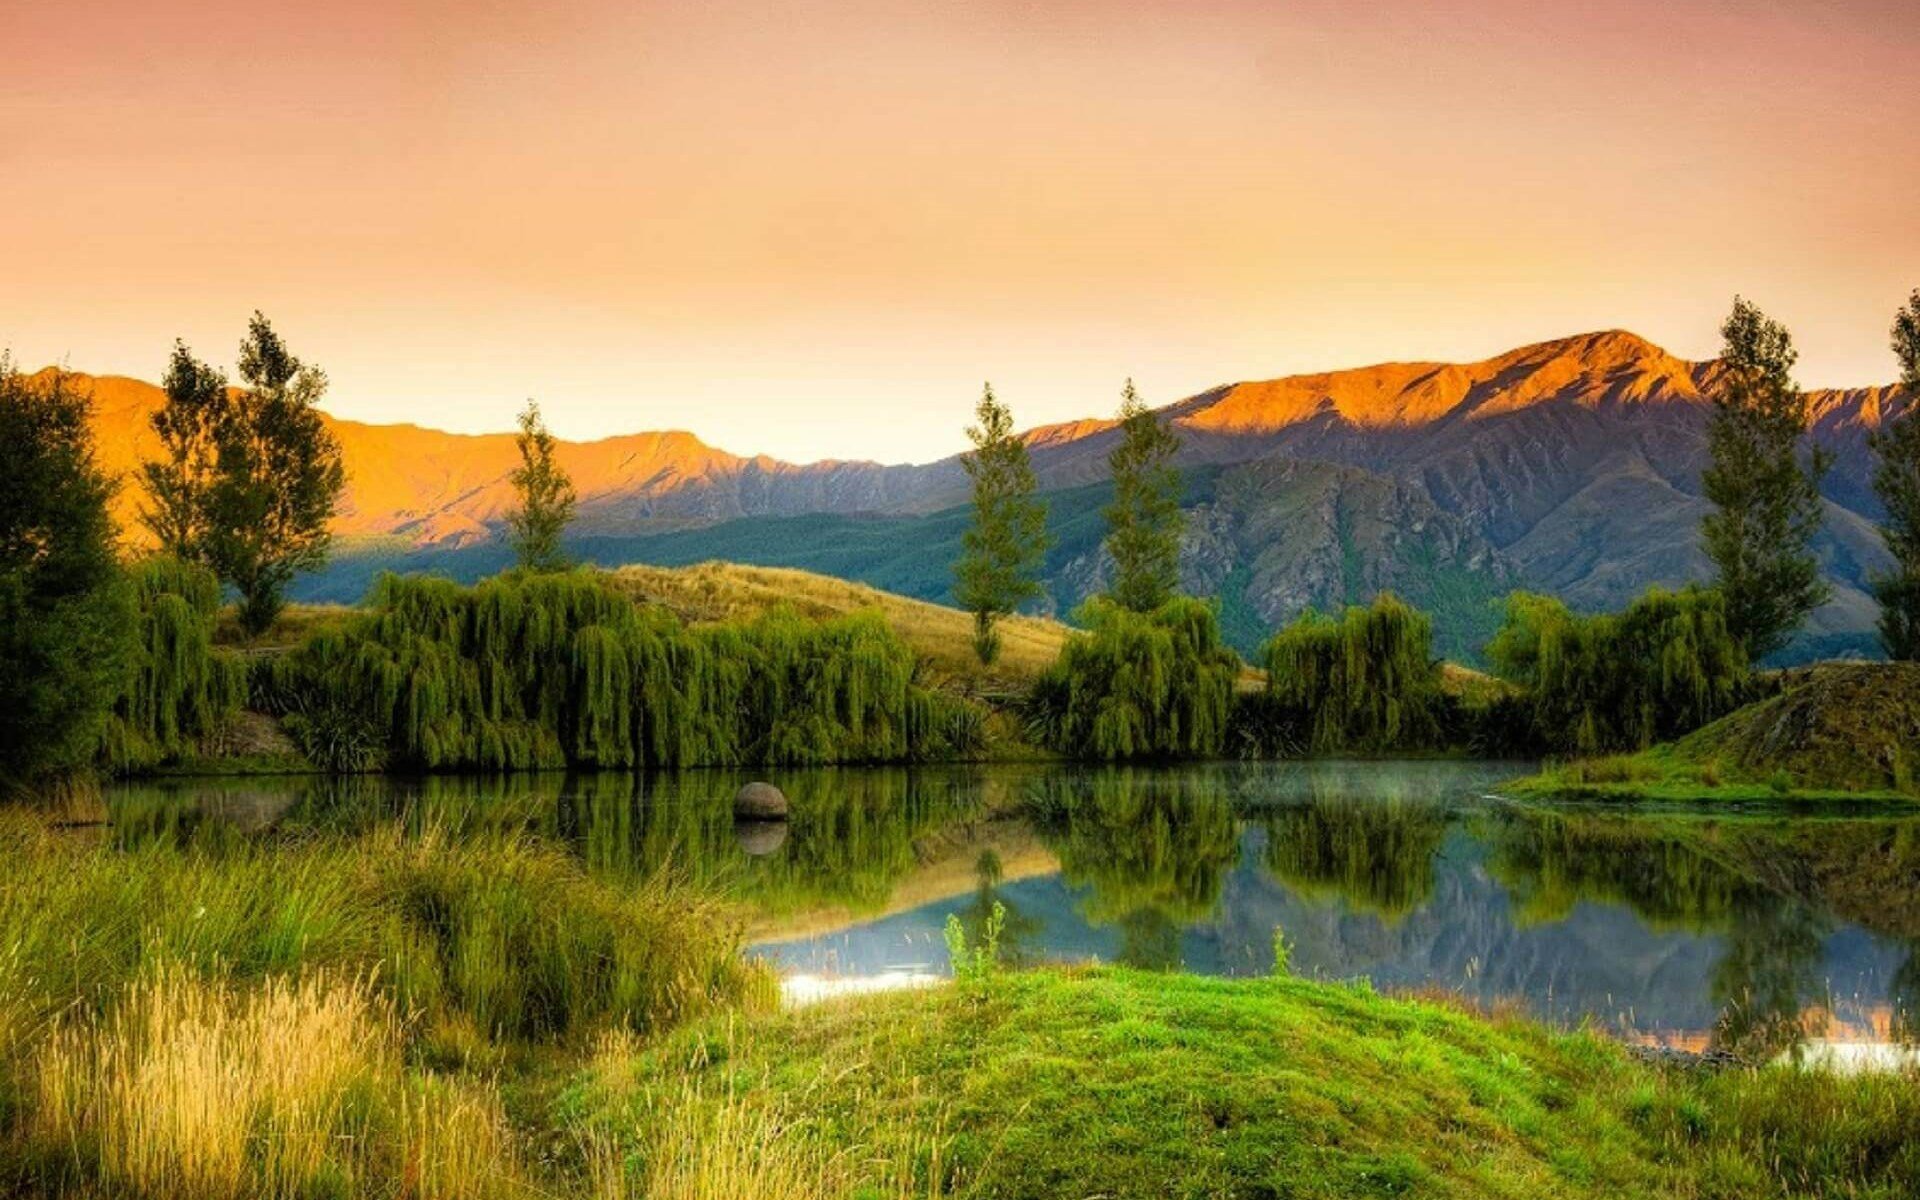 Top 40 Lord of the Rings Filming Locations in New Zealand